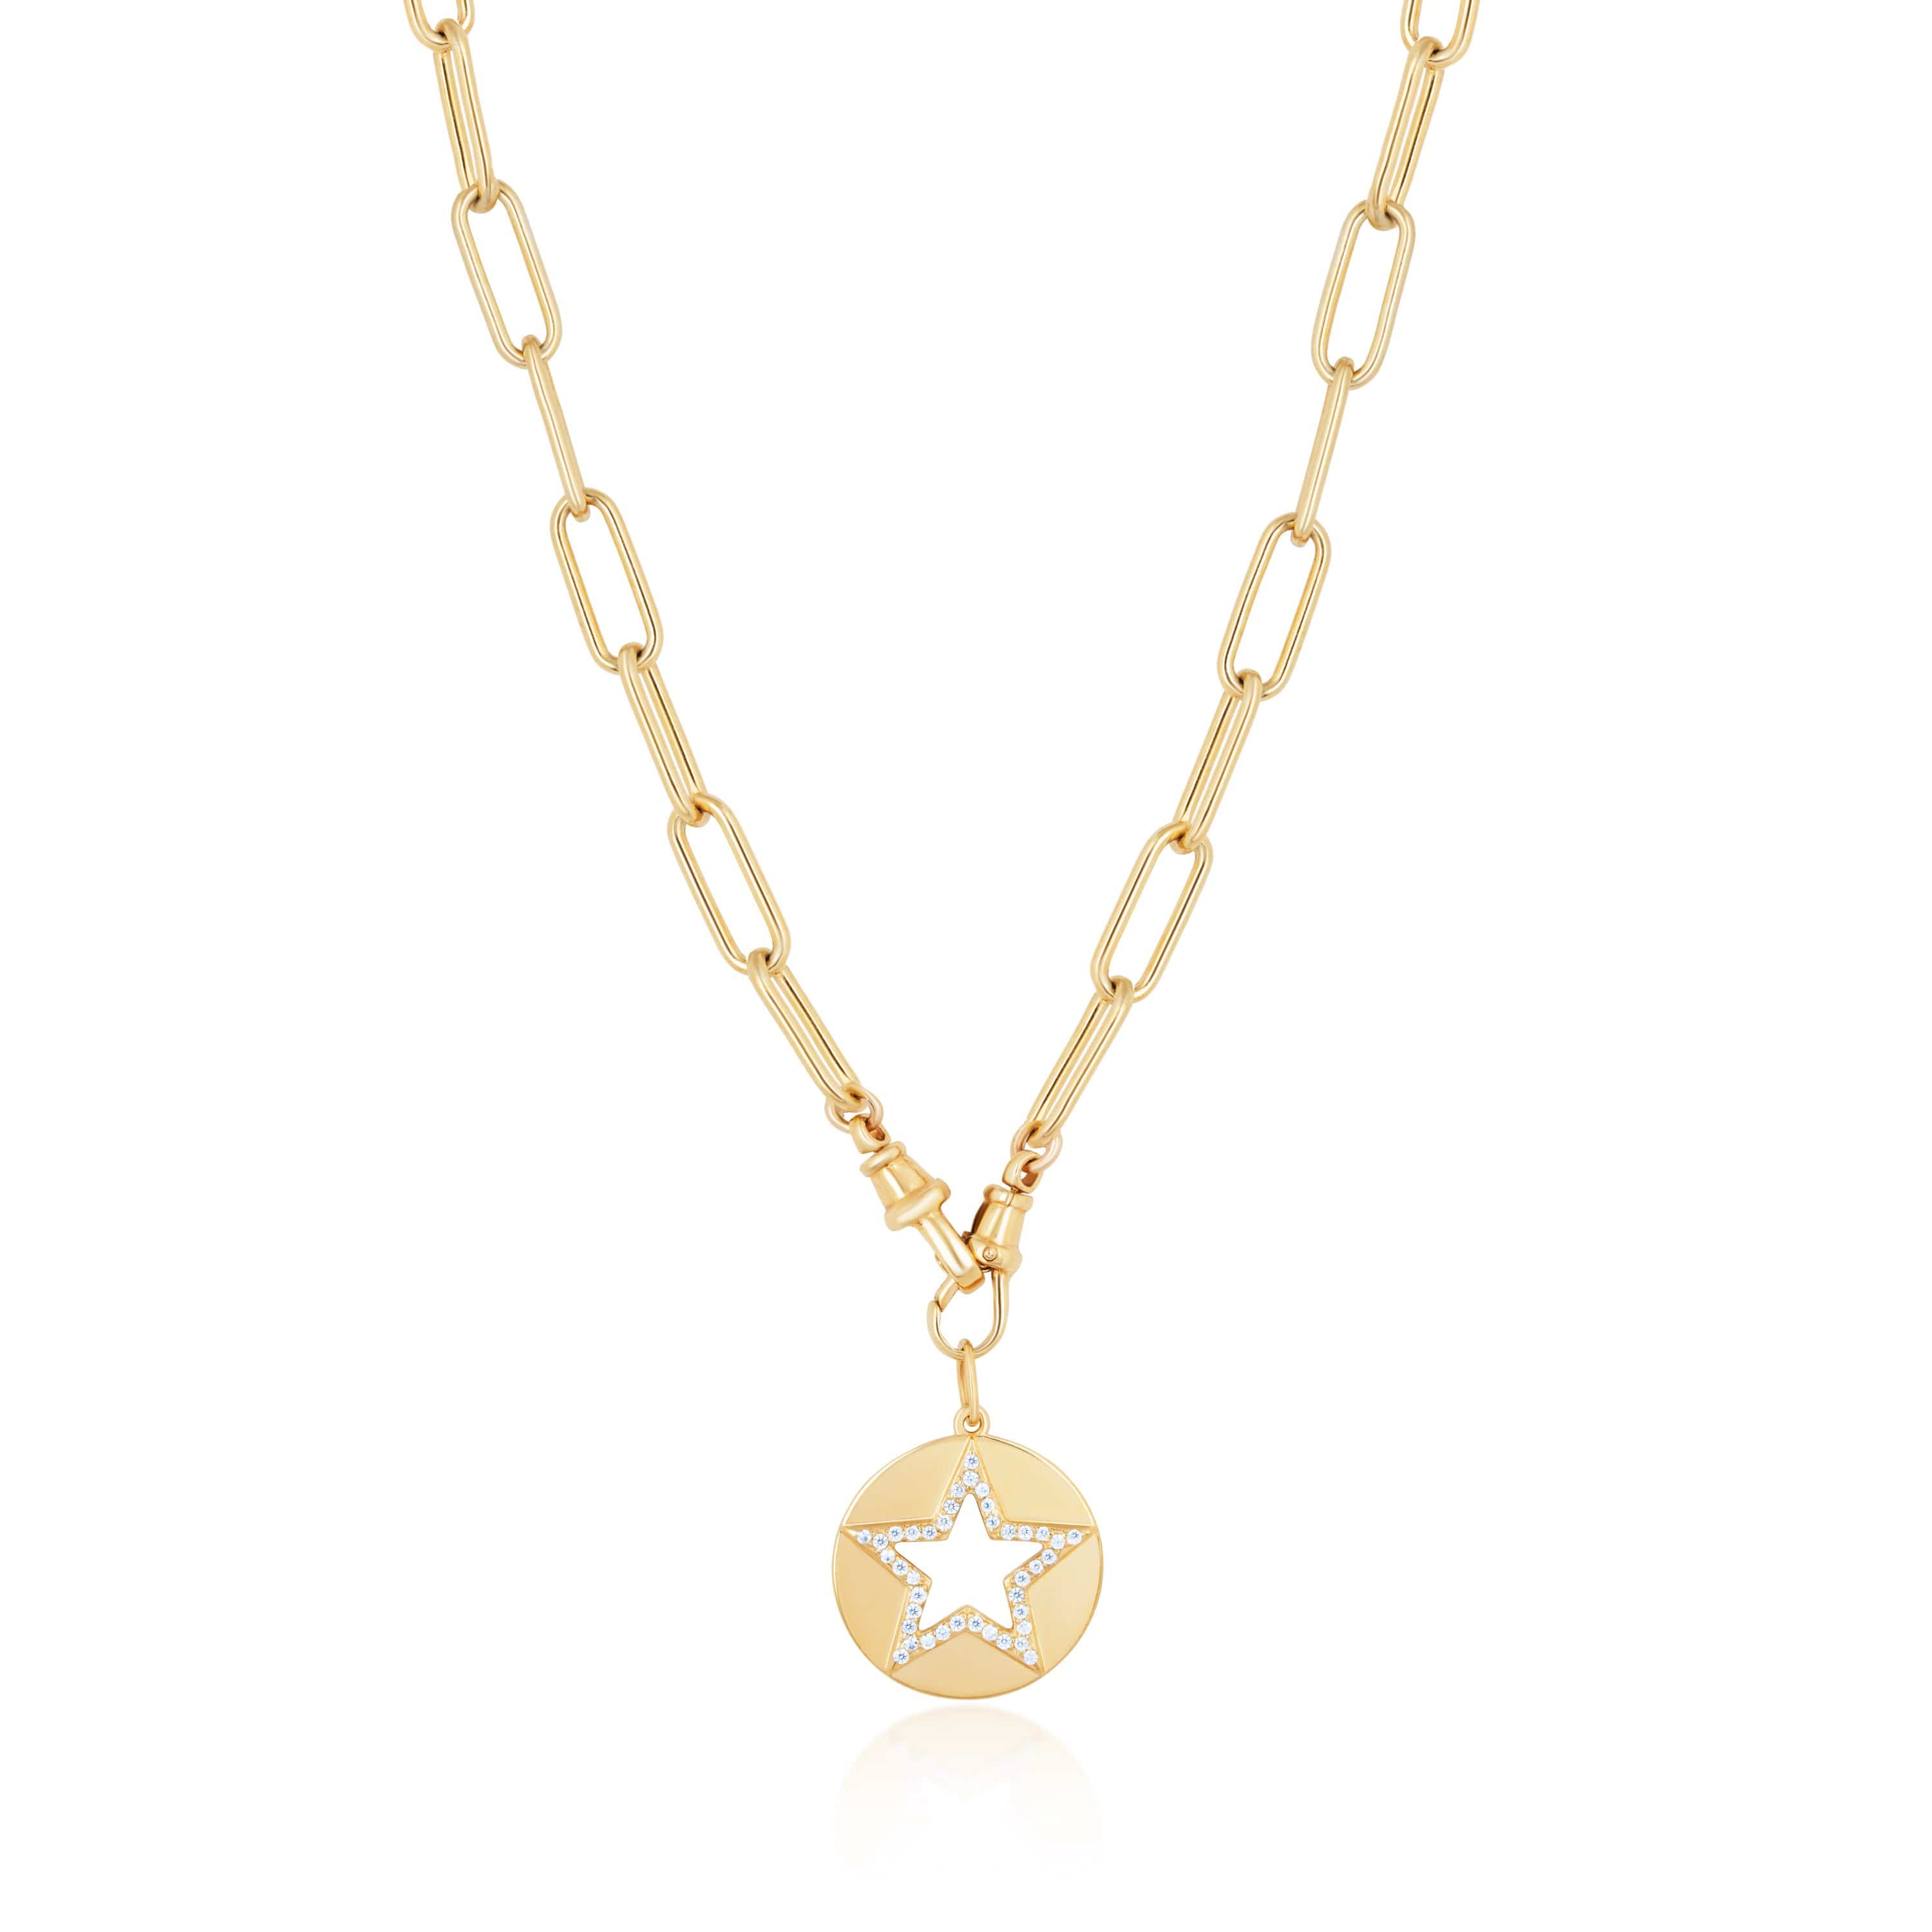 Double Clasp Necklace Heavy Rectangle Chain with Star Pendant / 14K Yellow Gold Plate